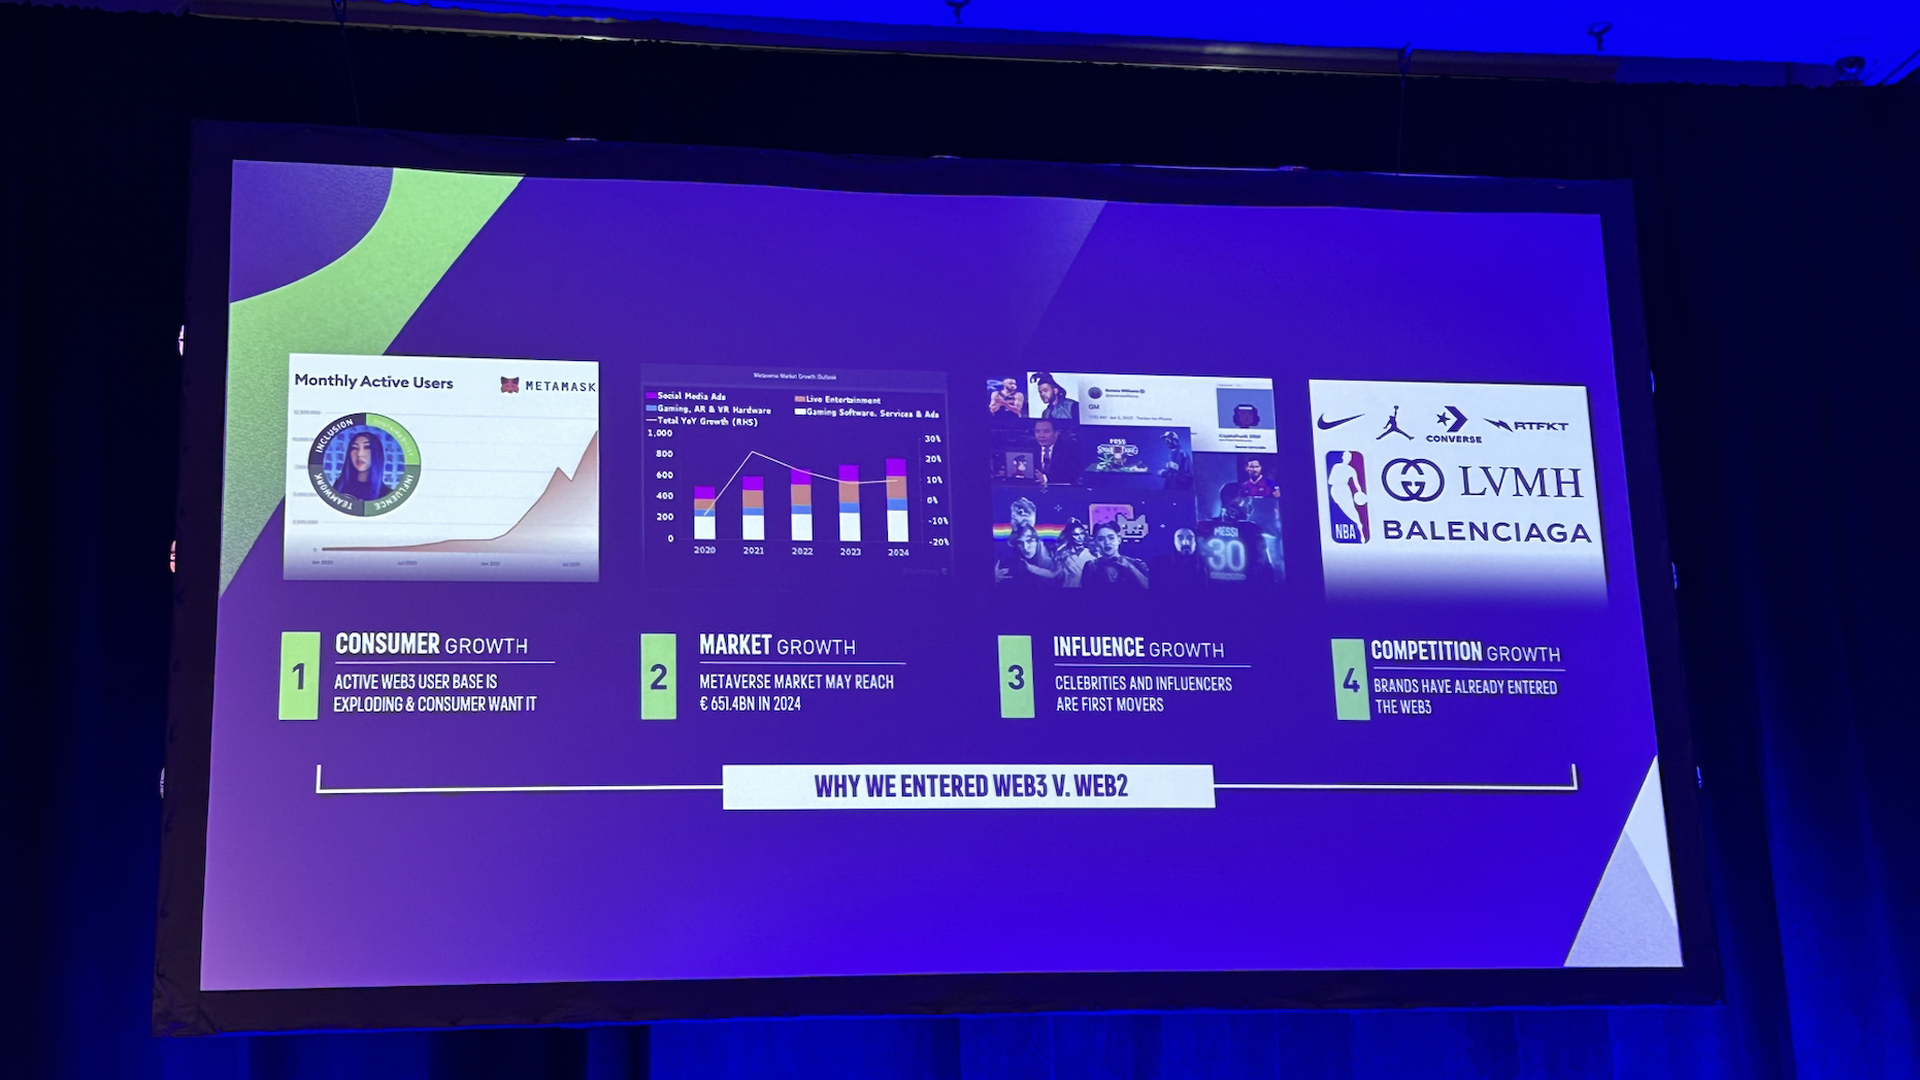 Slide from Adidas' presentation on its web3 and metaverse efforts at the DPAA Global Summit in New York on October 10, 2022.